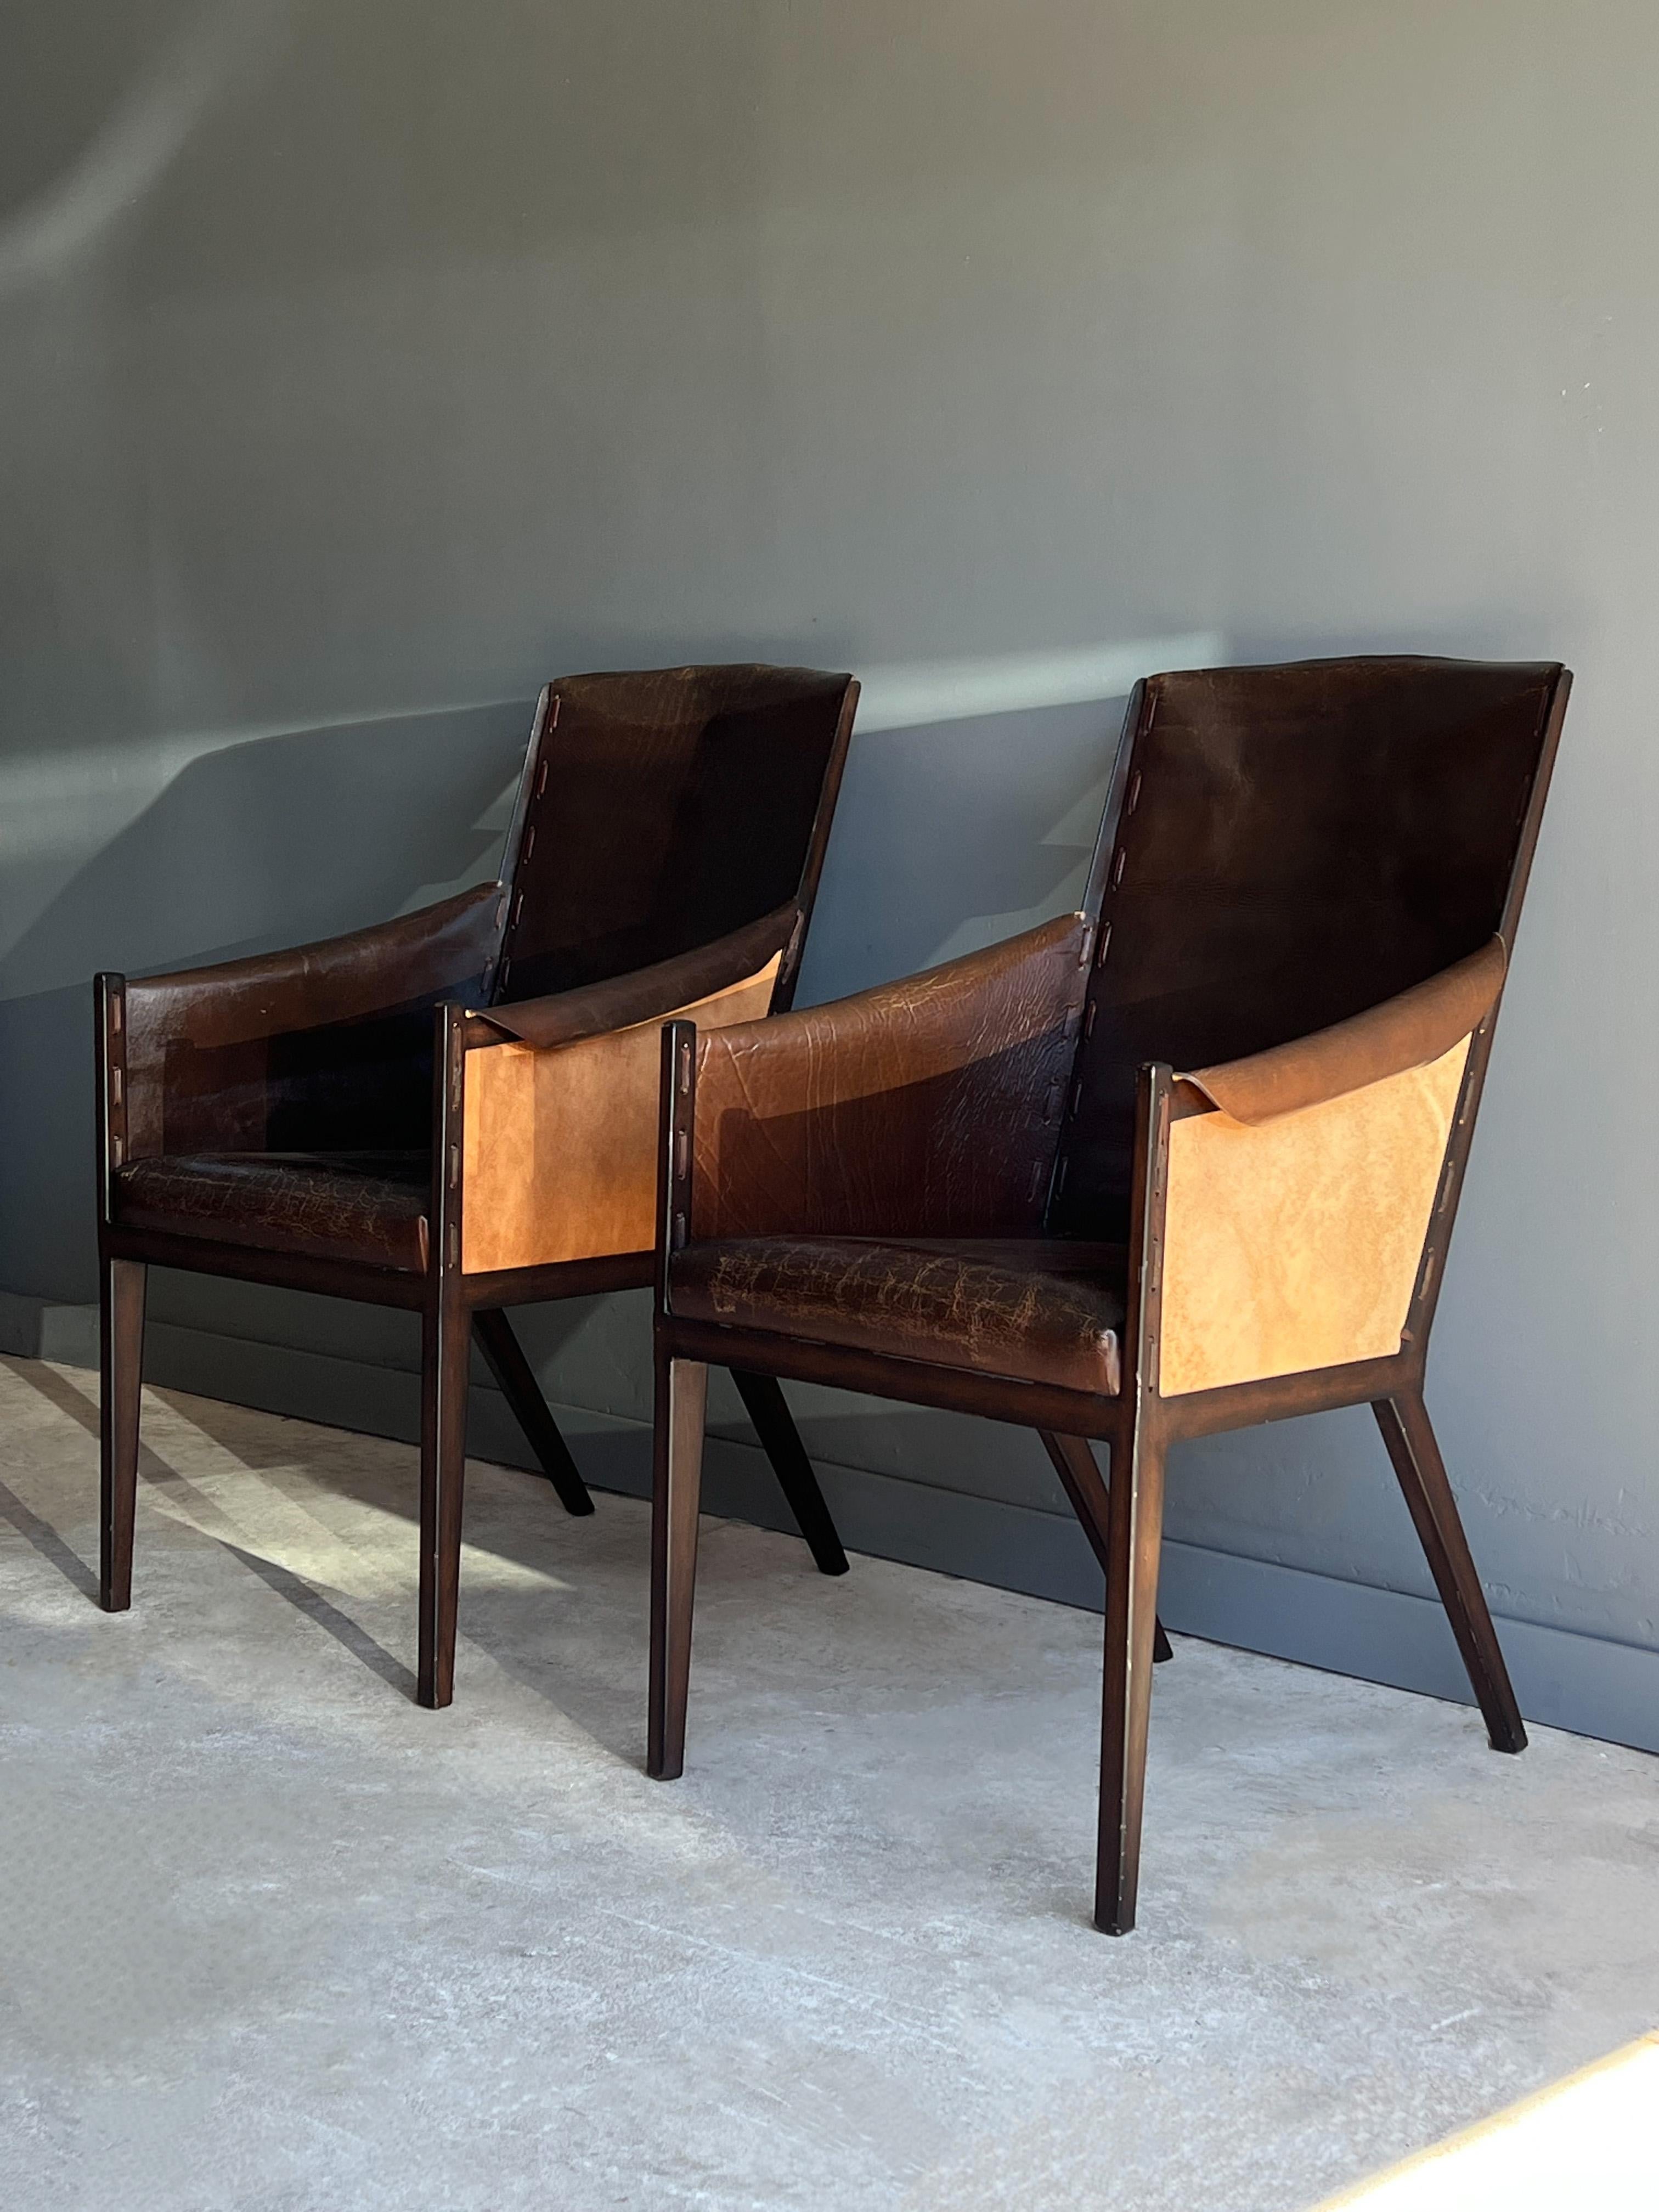 A lovely pair of French style arm chairs in the manner of Jean Michel Frank. Each chair is made with a thick leather and heavy gauge metal frames. The leather shows a nice patina and weathered appearance. Sides and back are whipped stitched onto the